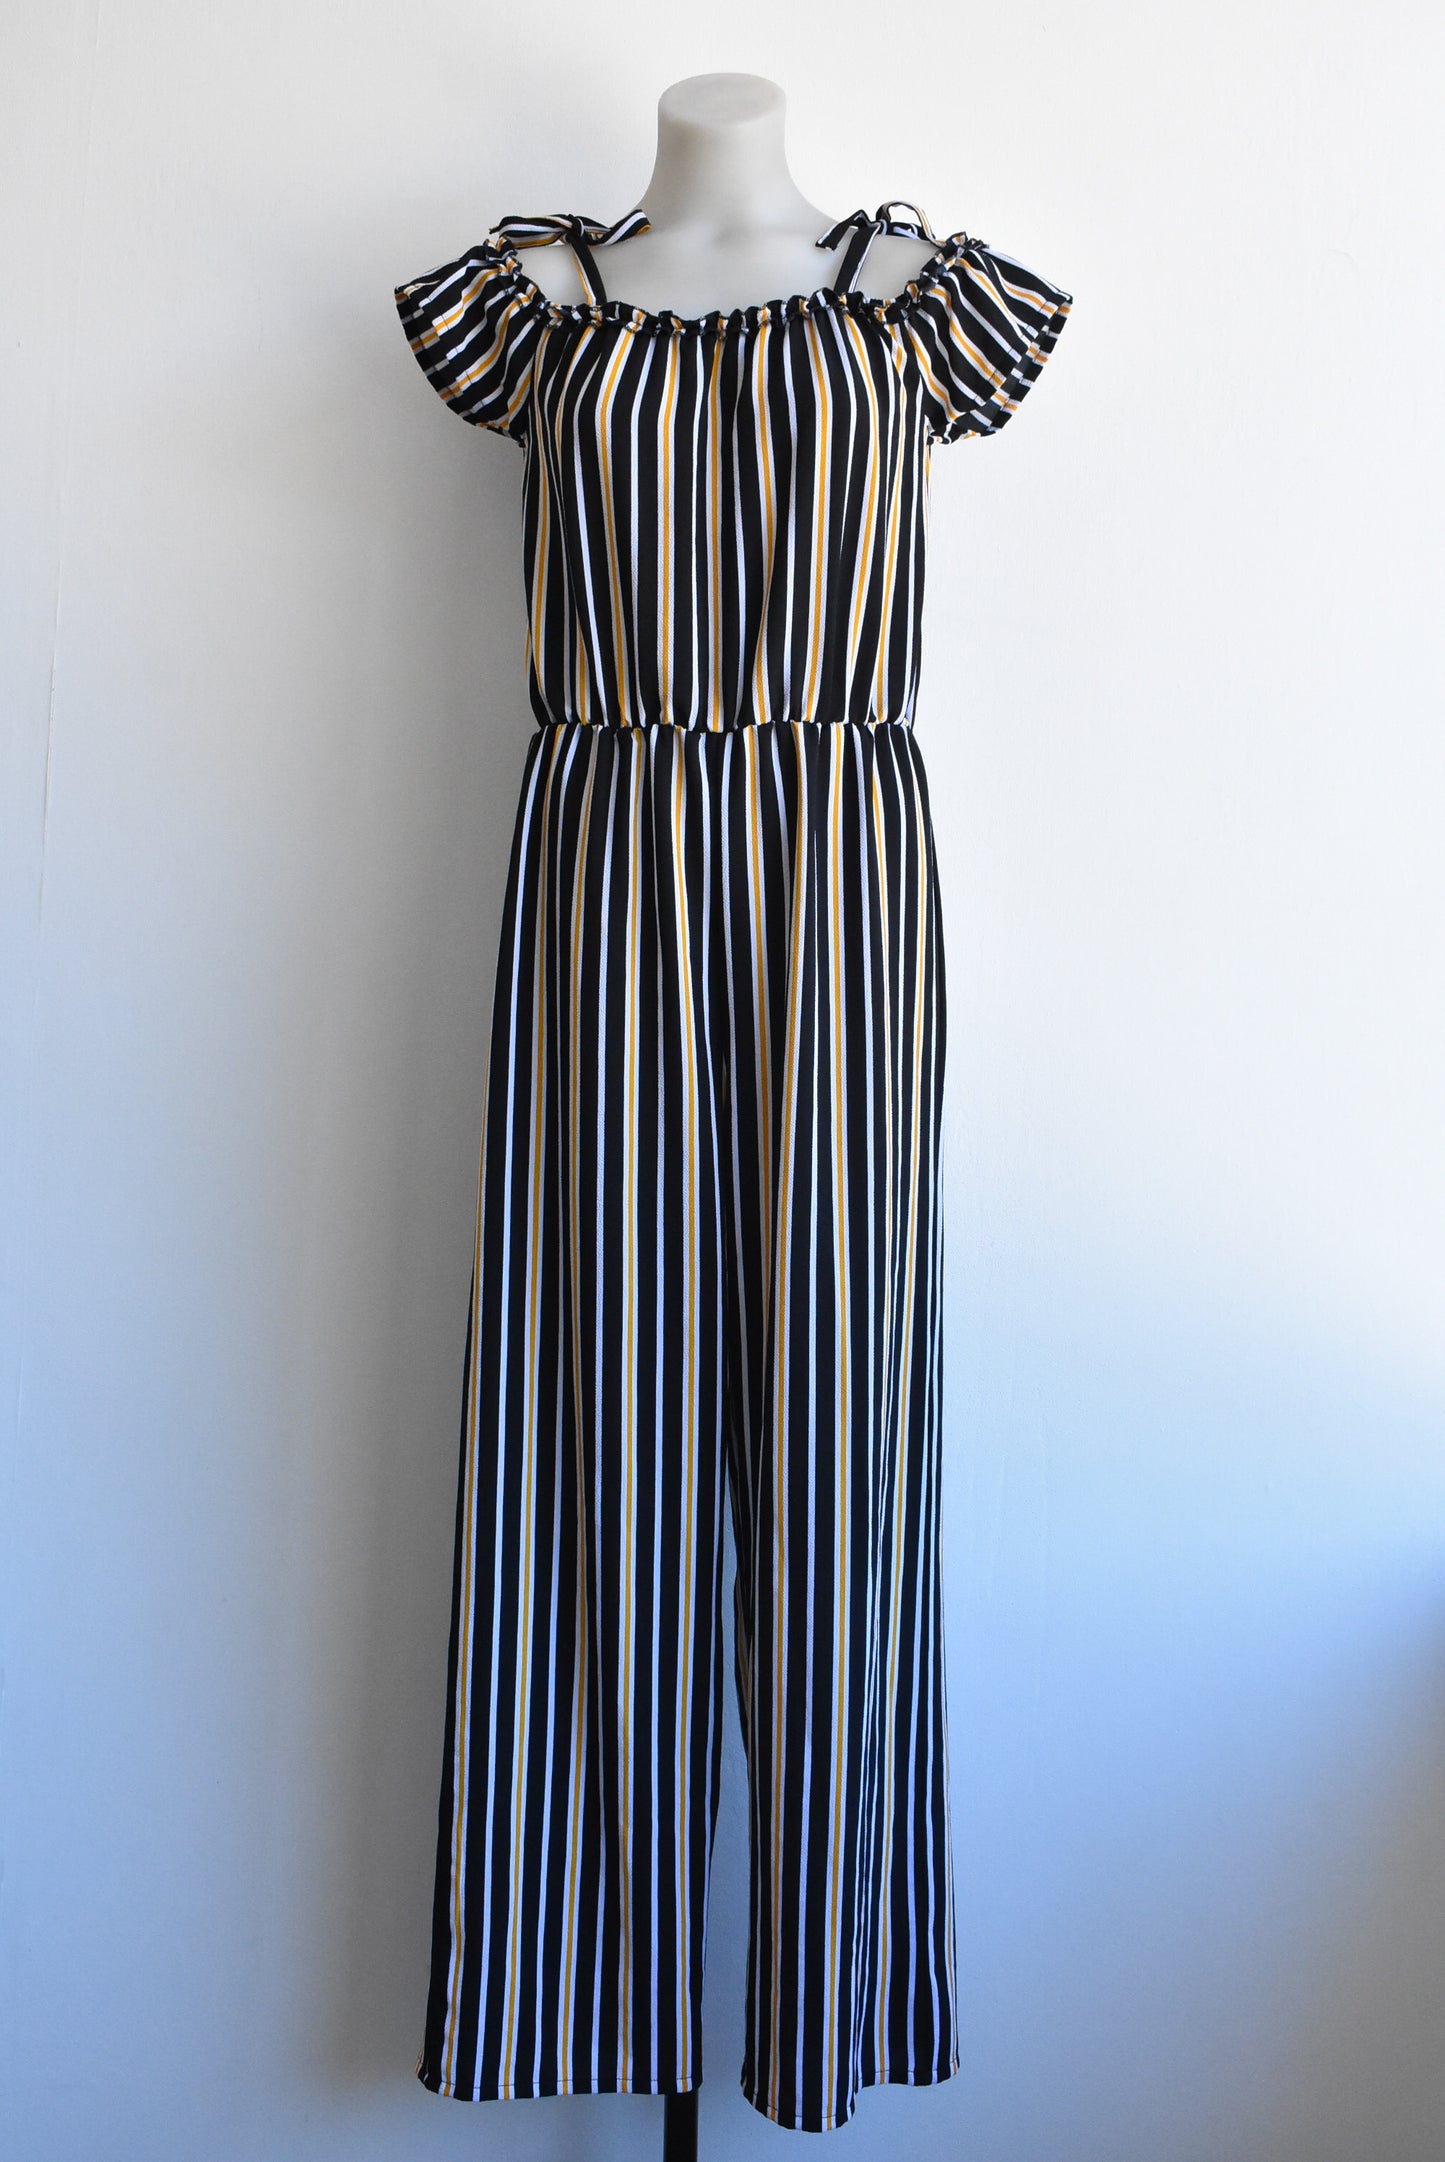 Switch Girls off-the-shoulder black/orange striped jumpsuit, size 16yrs (likely fit size 6/8 adult)